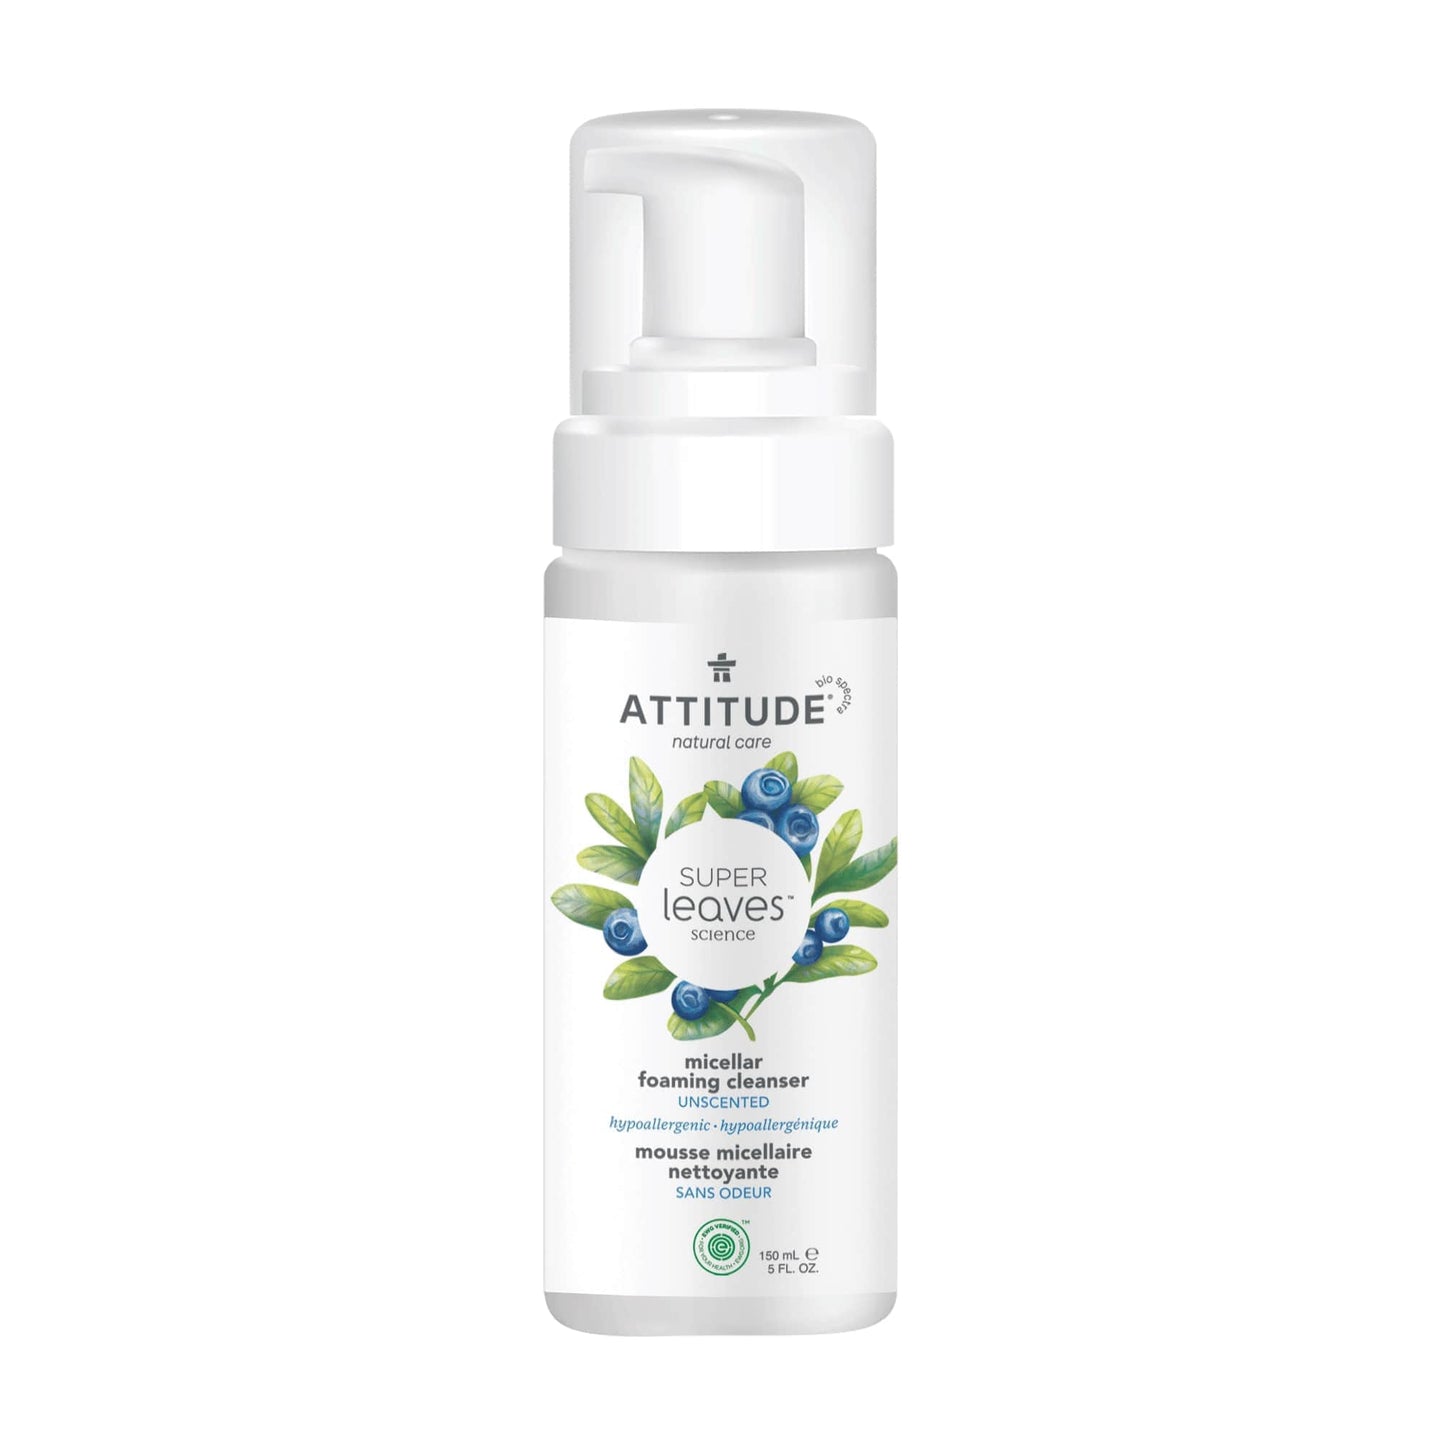 ATTITUDE Micellar foaming cleanser Unscented 14060_en?_main? Unscented